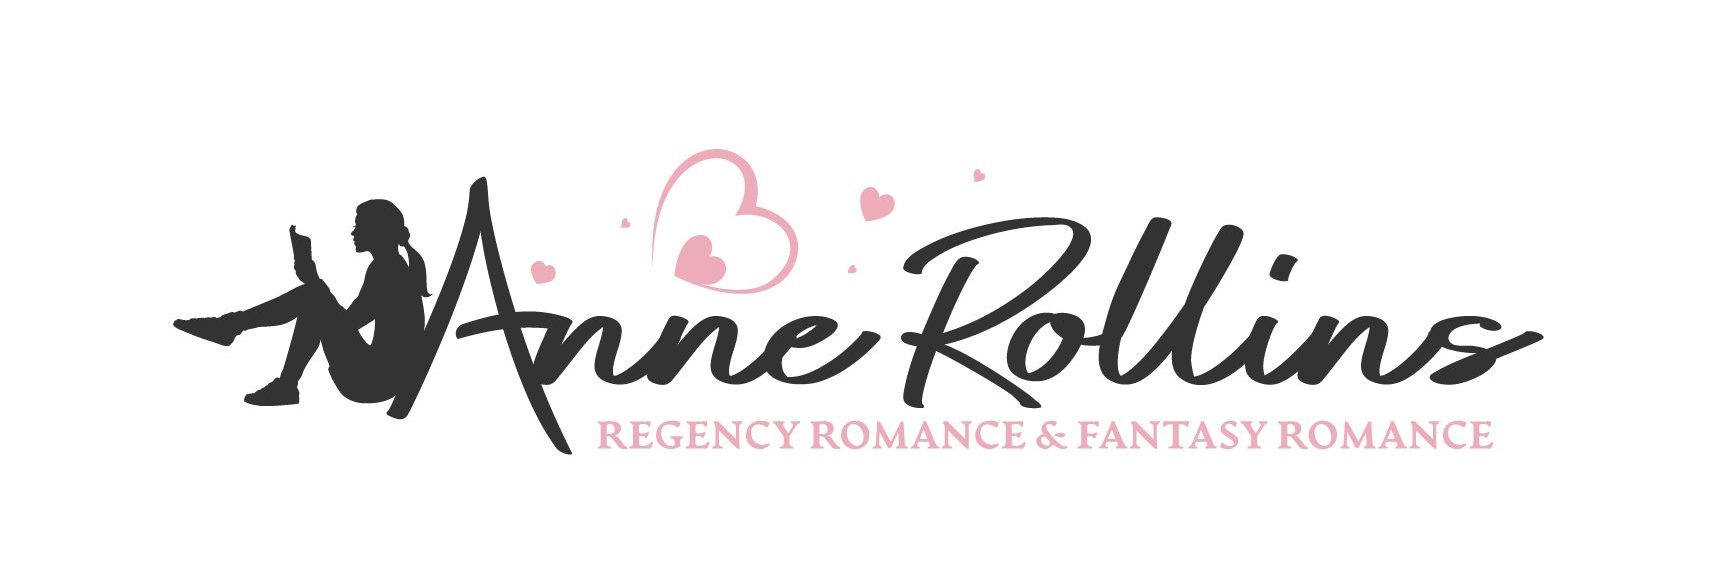 White square graphic. In center is black text that looks handwritten, reading "Anne Rollins." Image of a woman reading a book leans against the A. Above the name are pink hearts. Below the name, pink text reads "Regency Romance & Fantasy Romance."